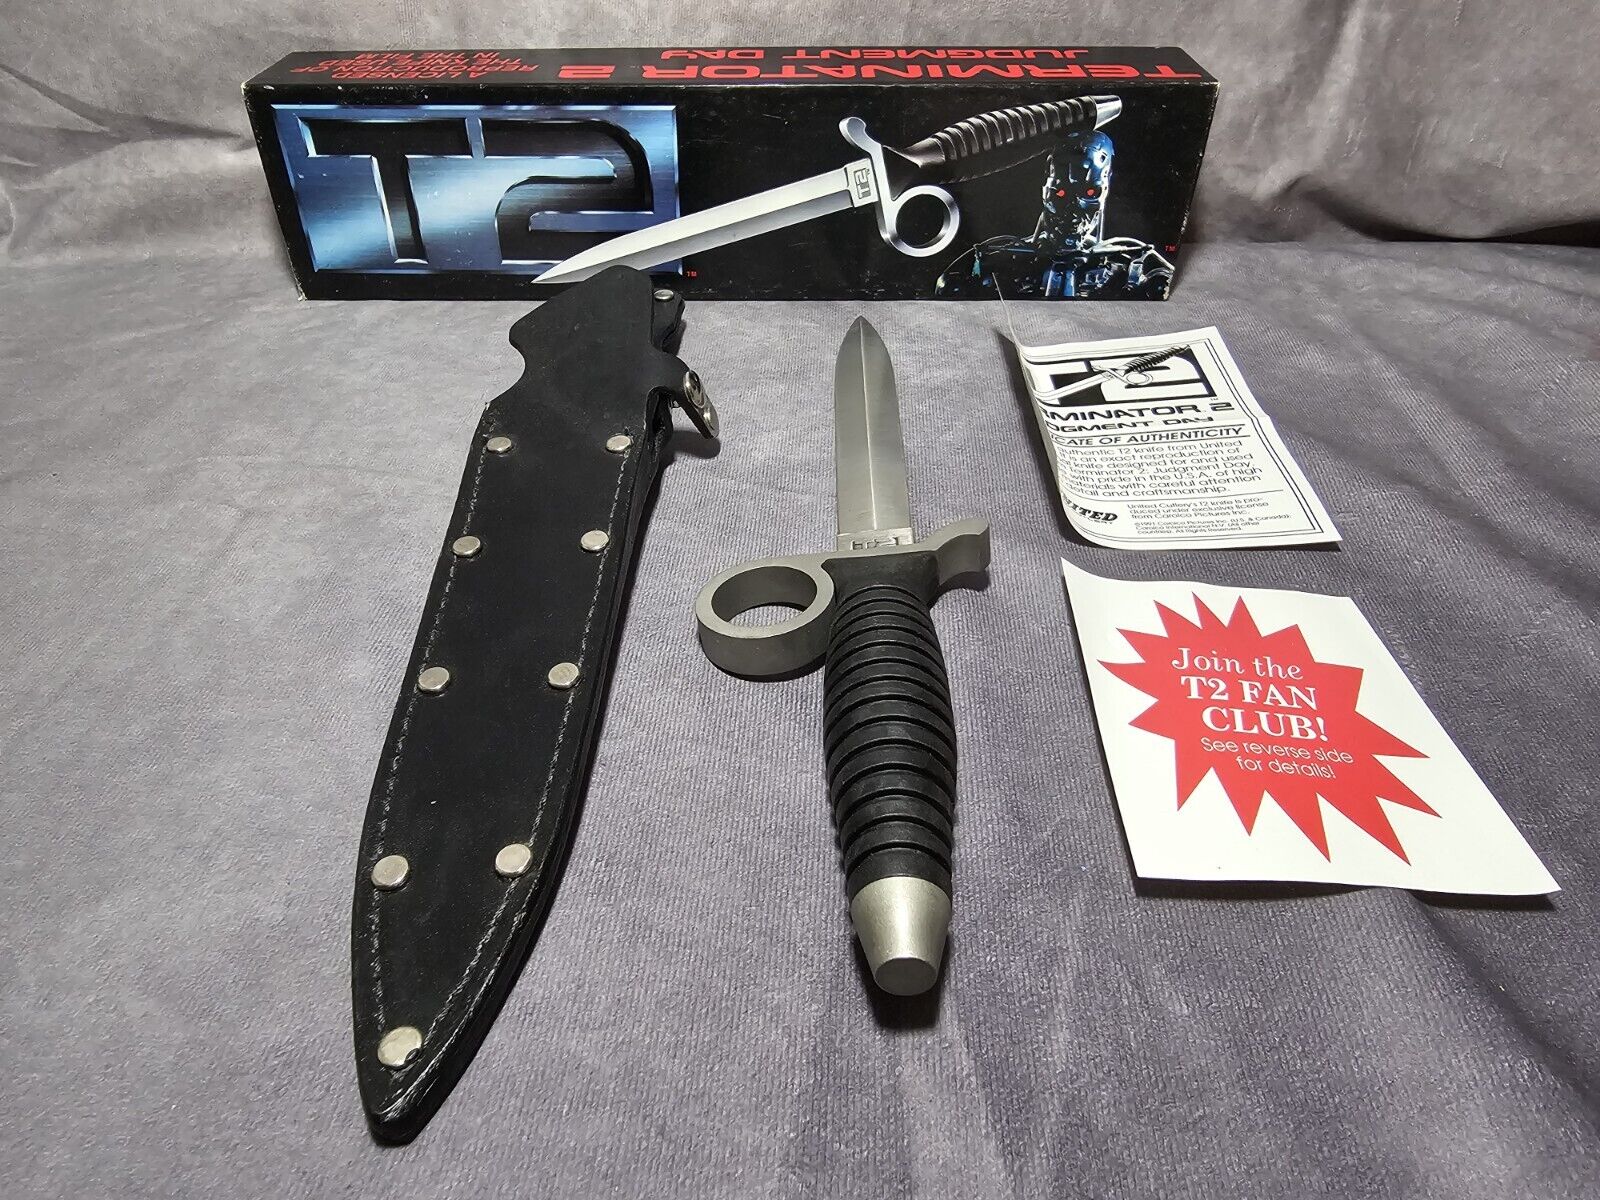 United Cutlery 1991 Terminator 2 T2 Judgement Day Commemorative Fighting Knife